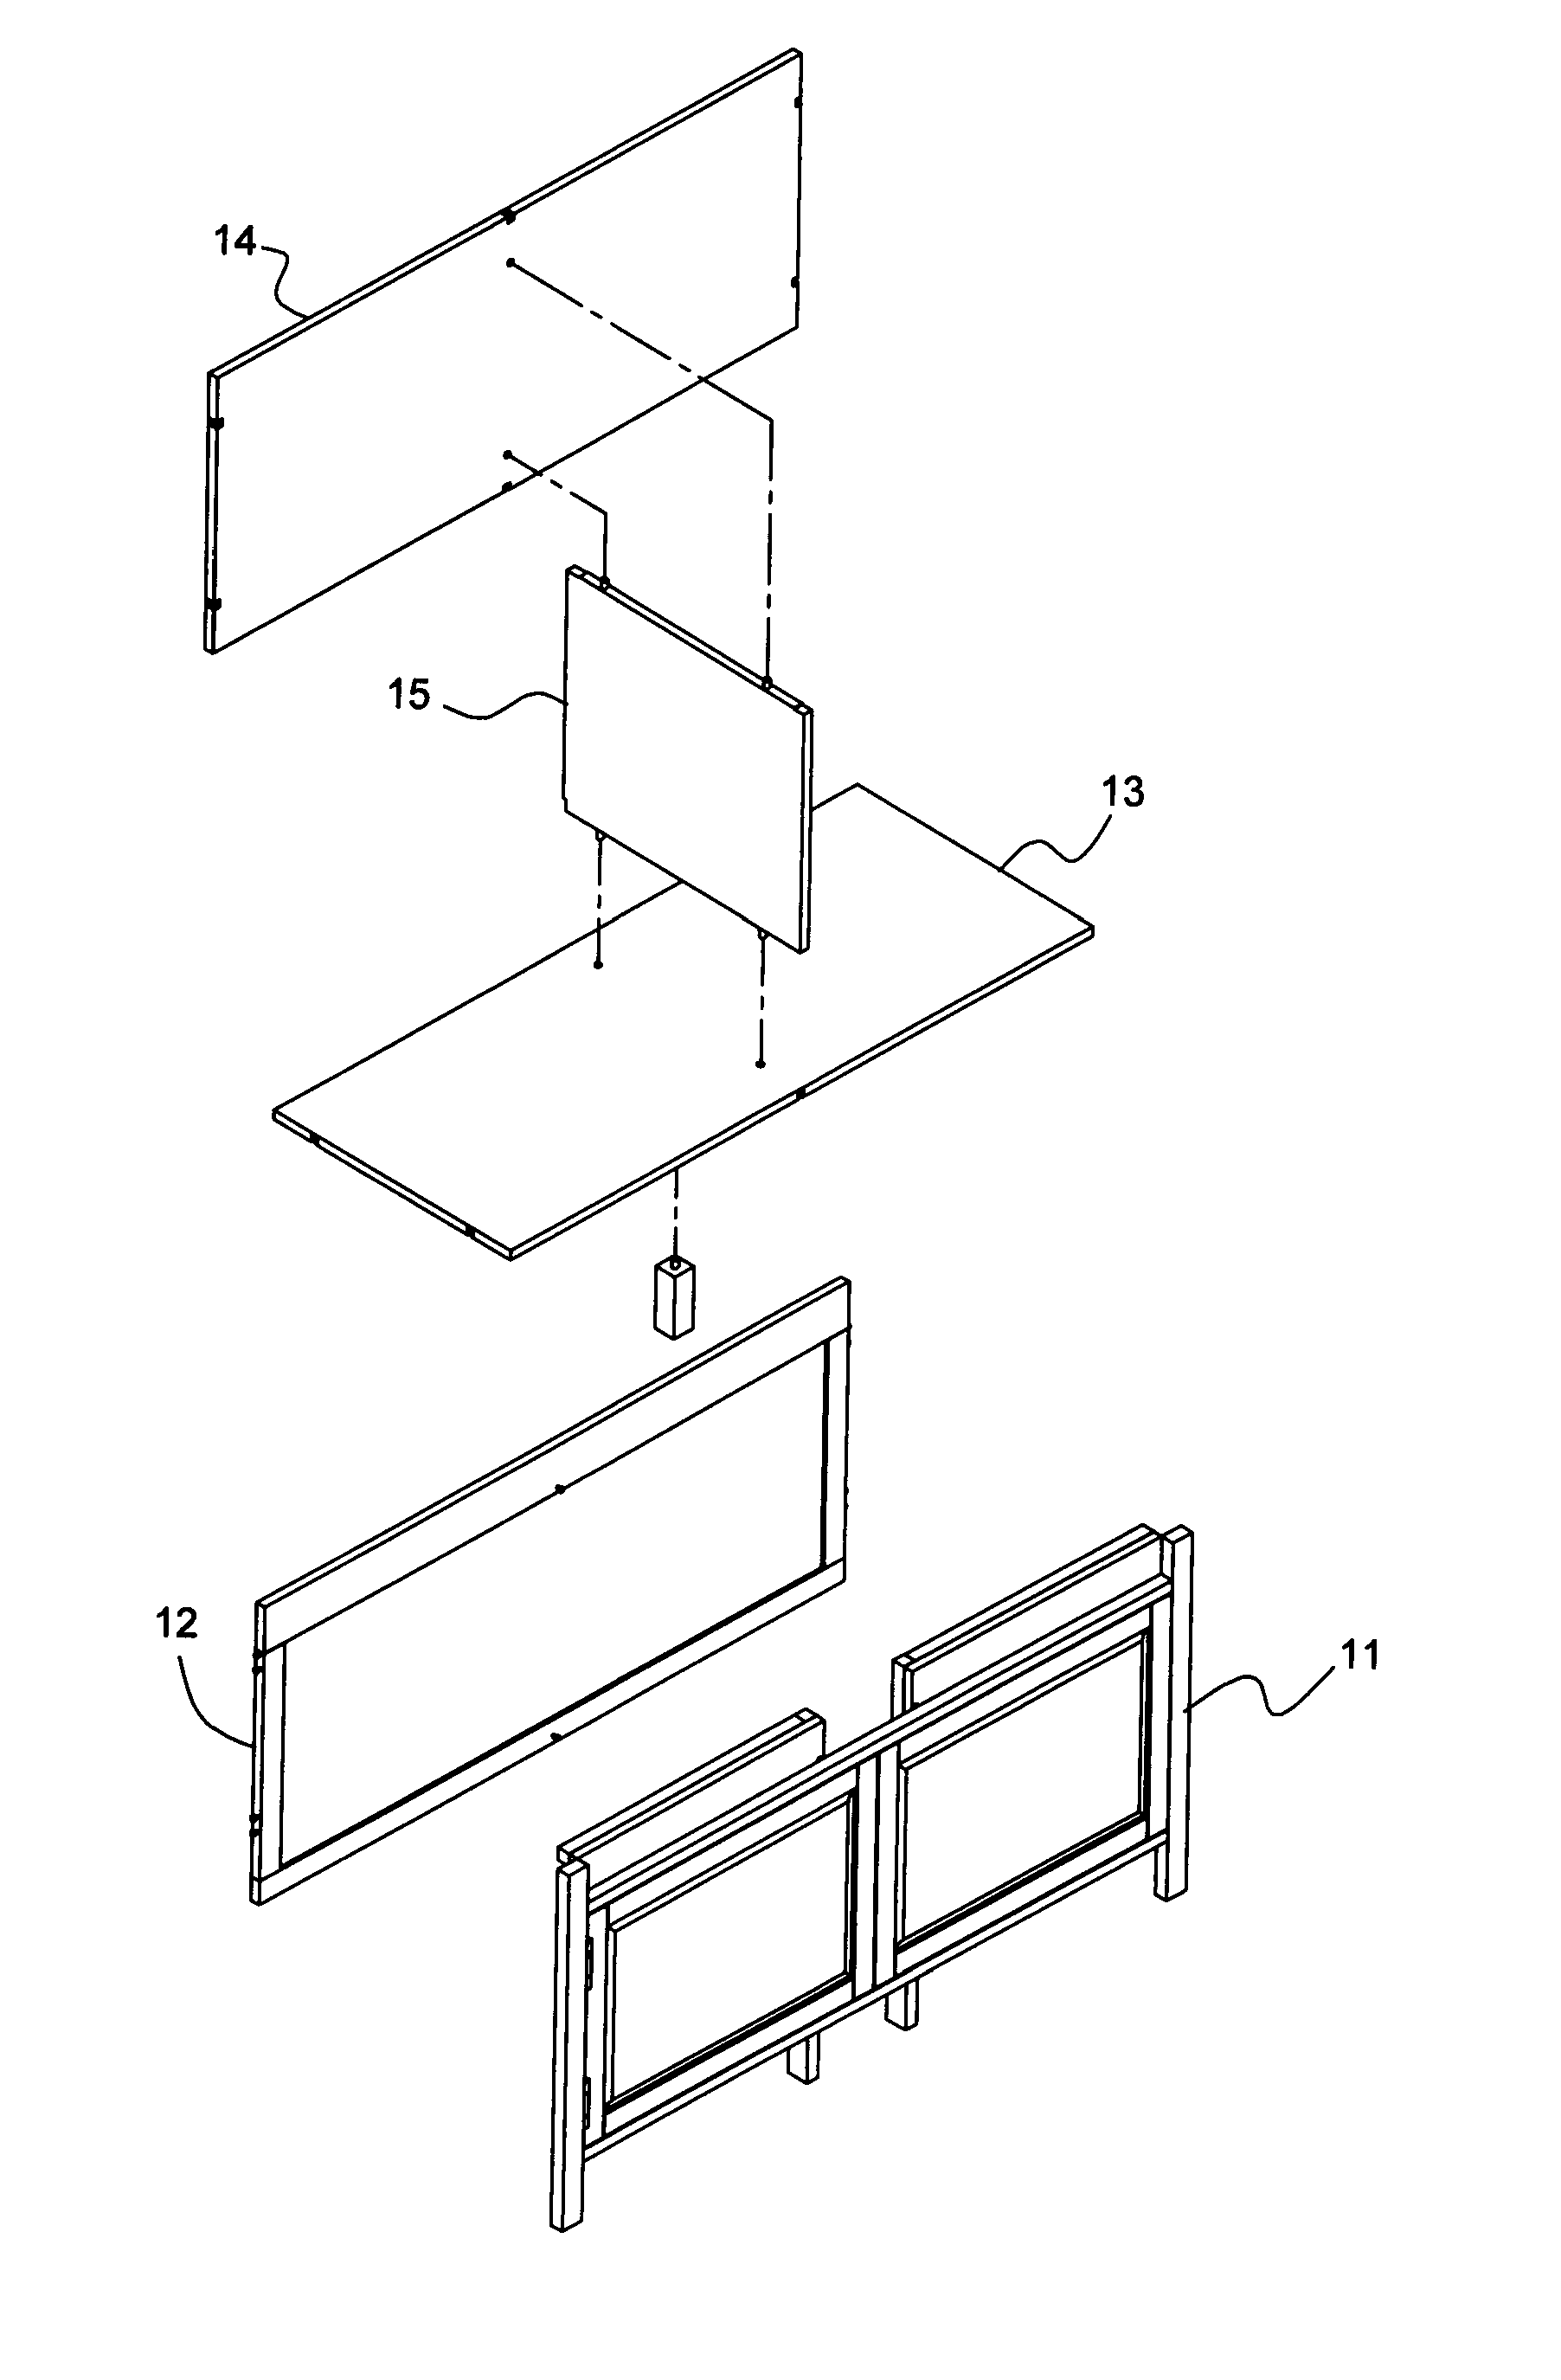 Bench cabinet assembly which can be assembled and disassembled without tools